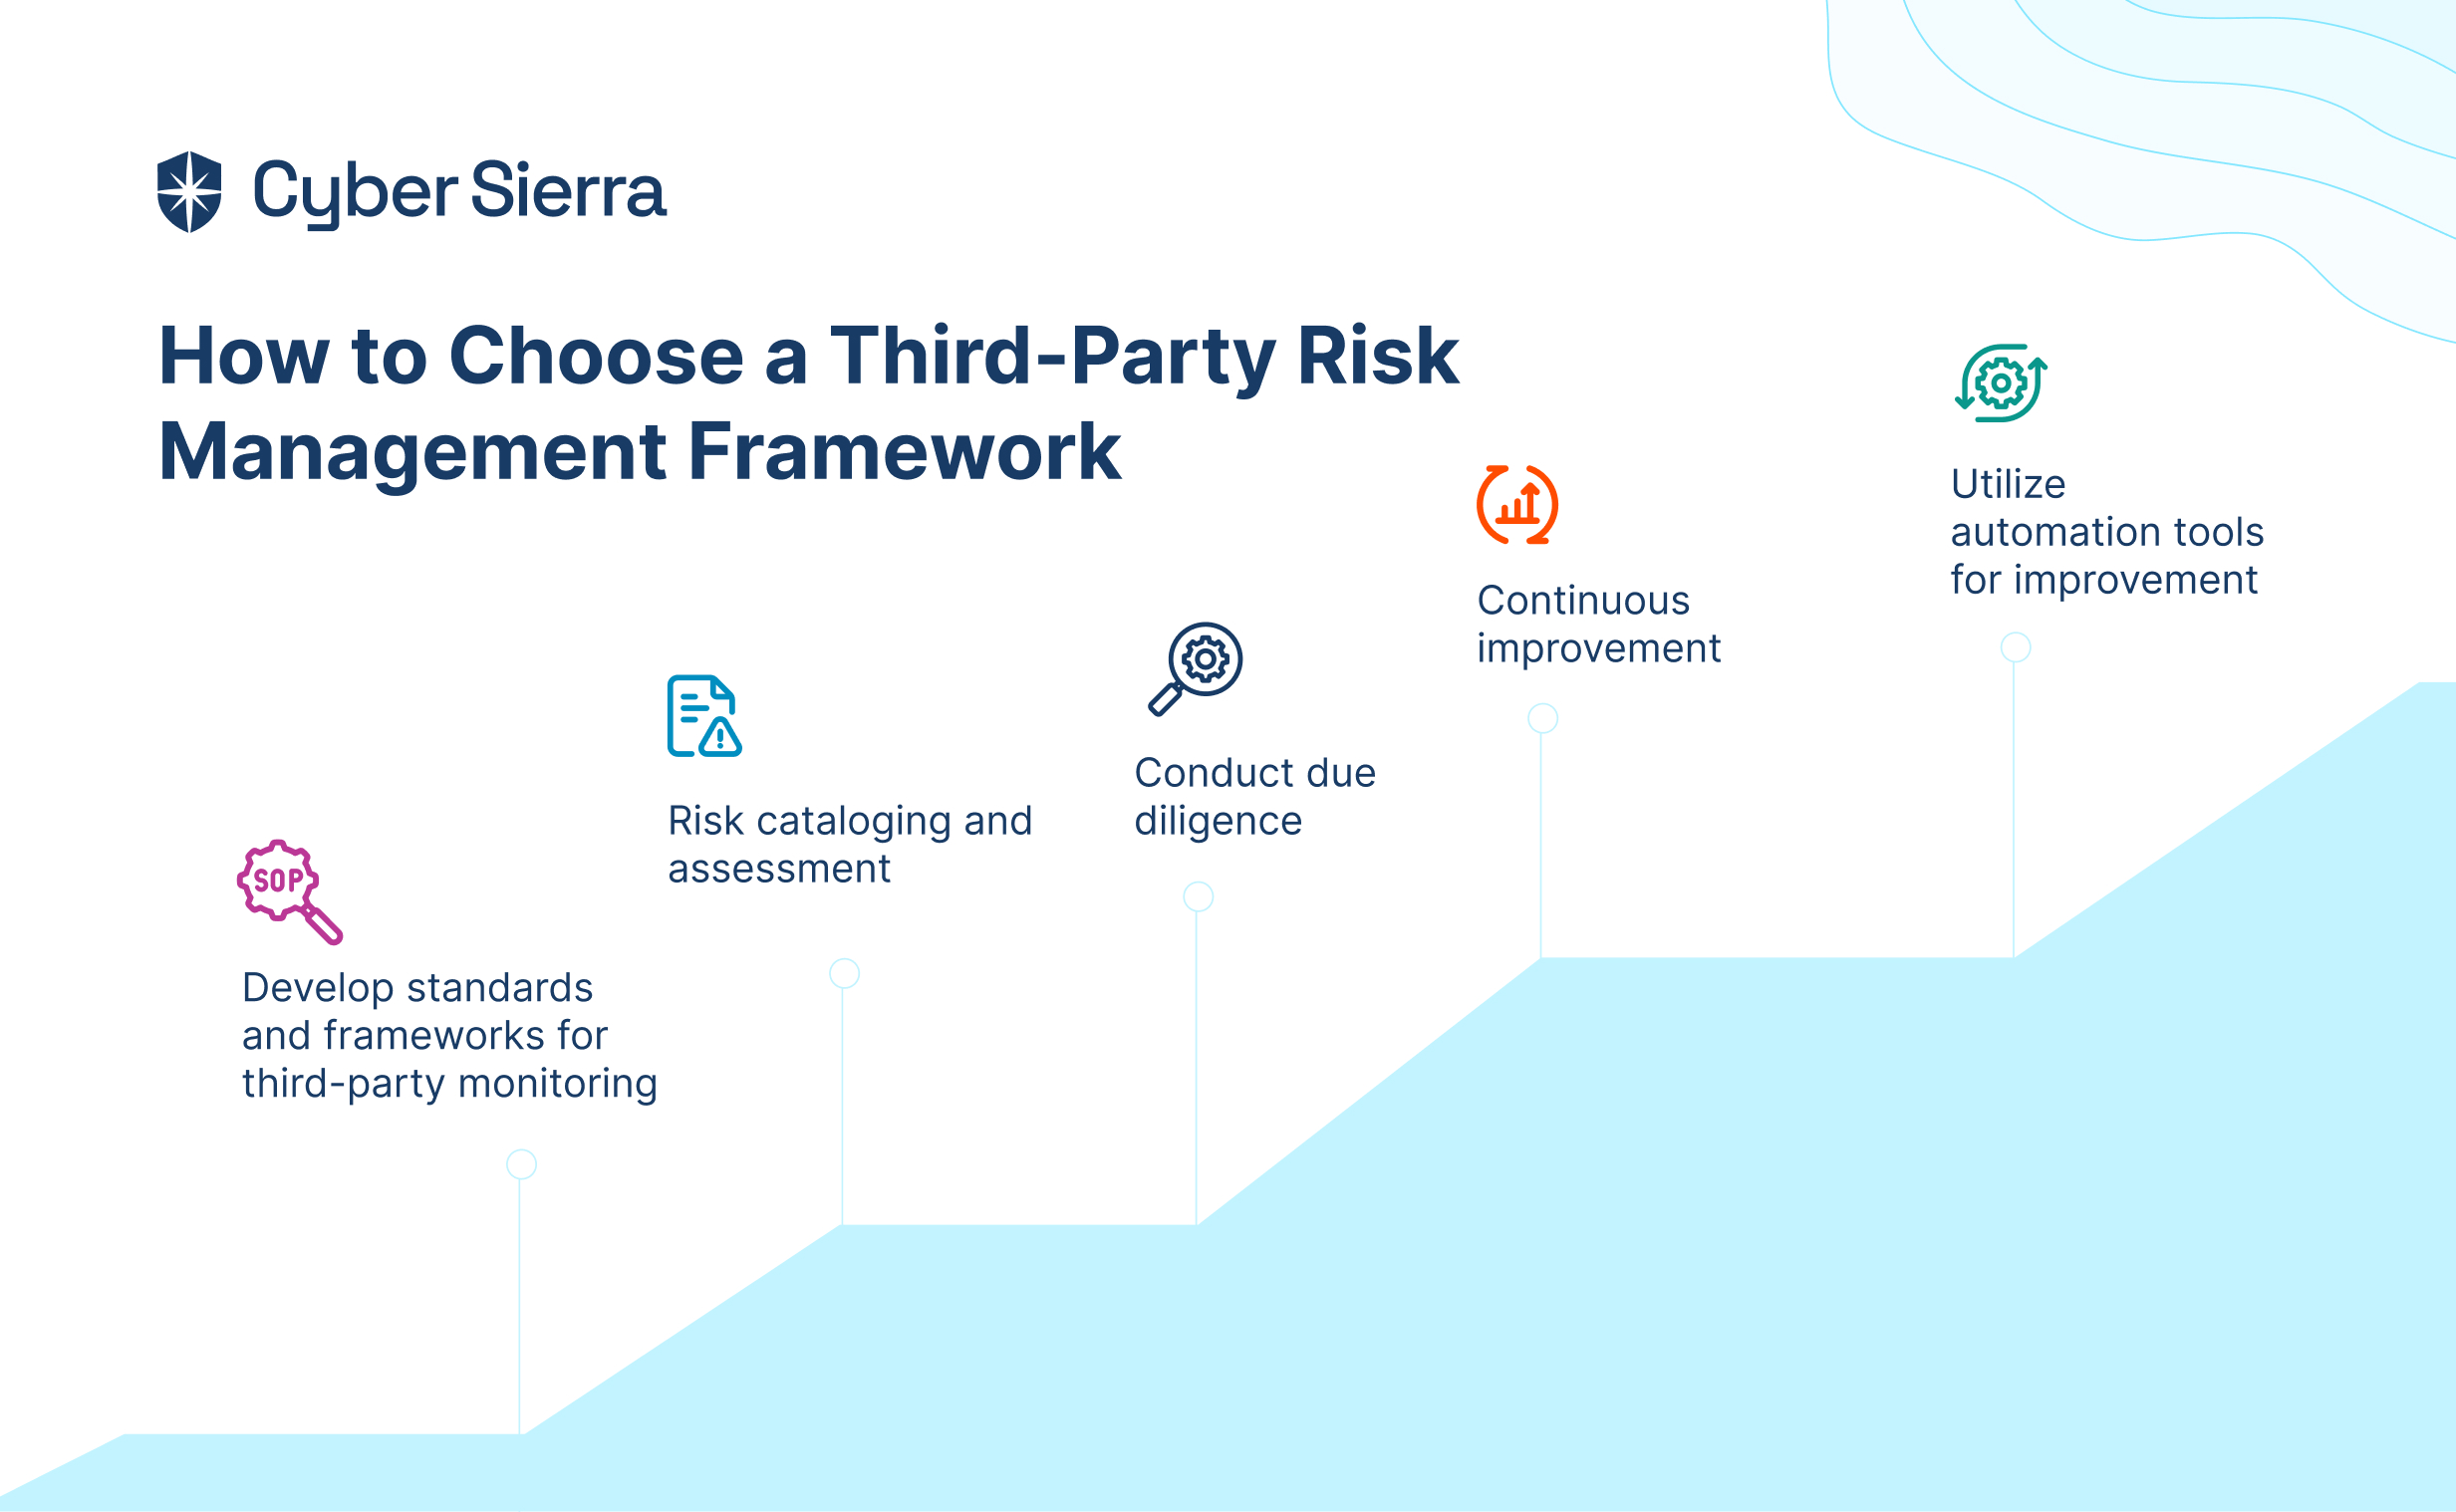 Best practices to maintain third-party risk management framework